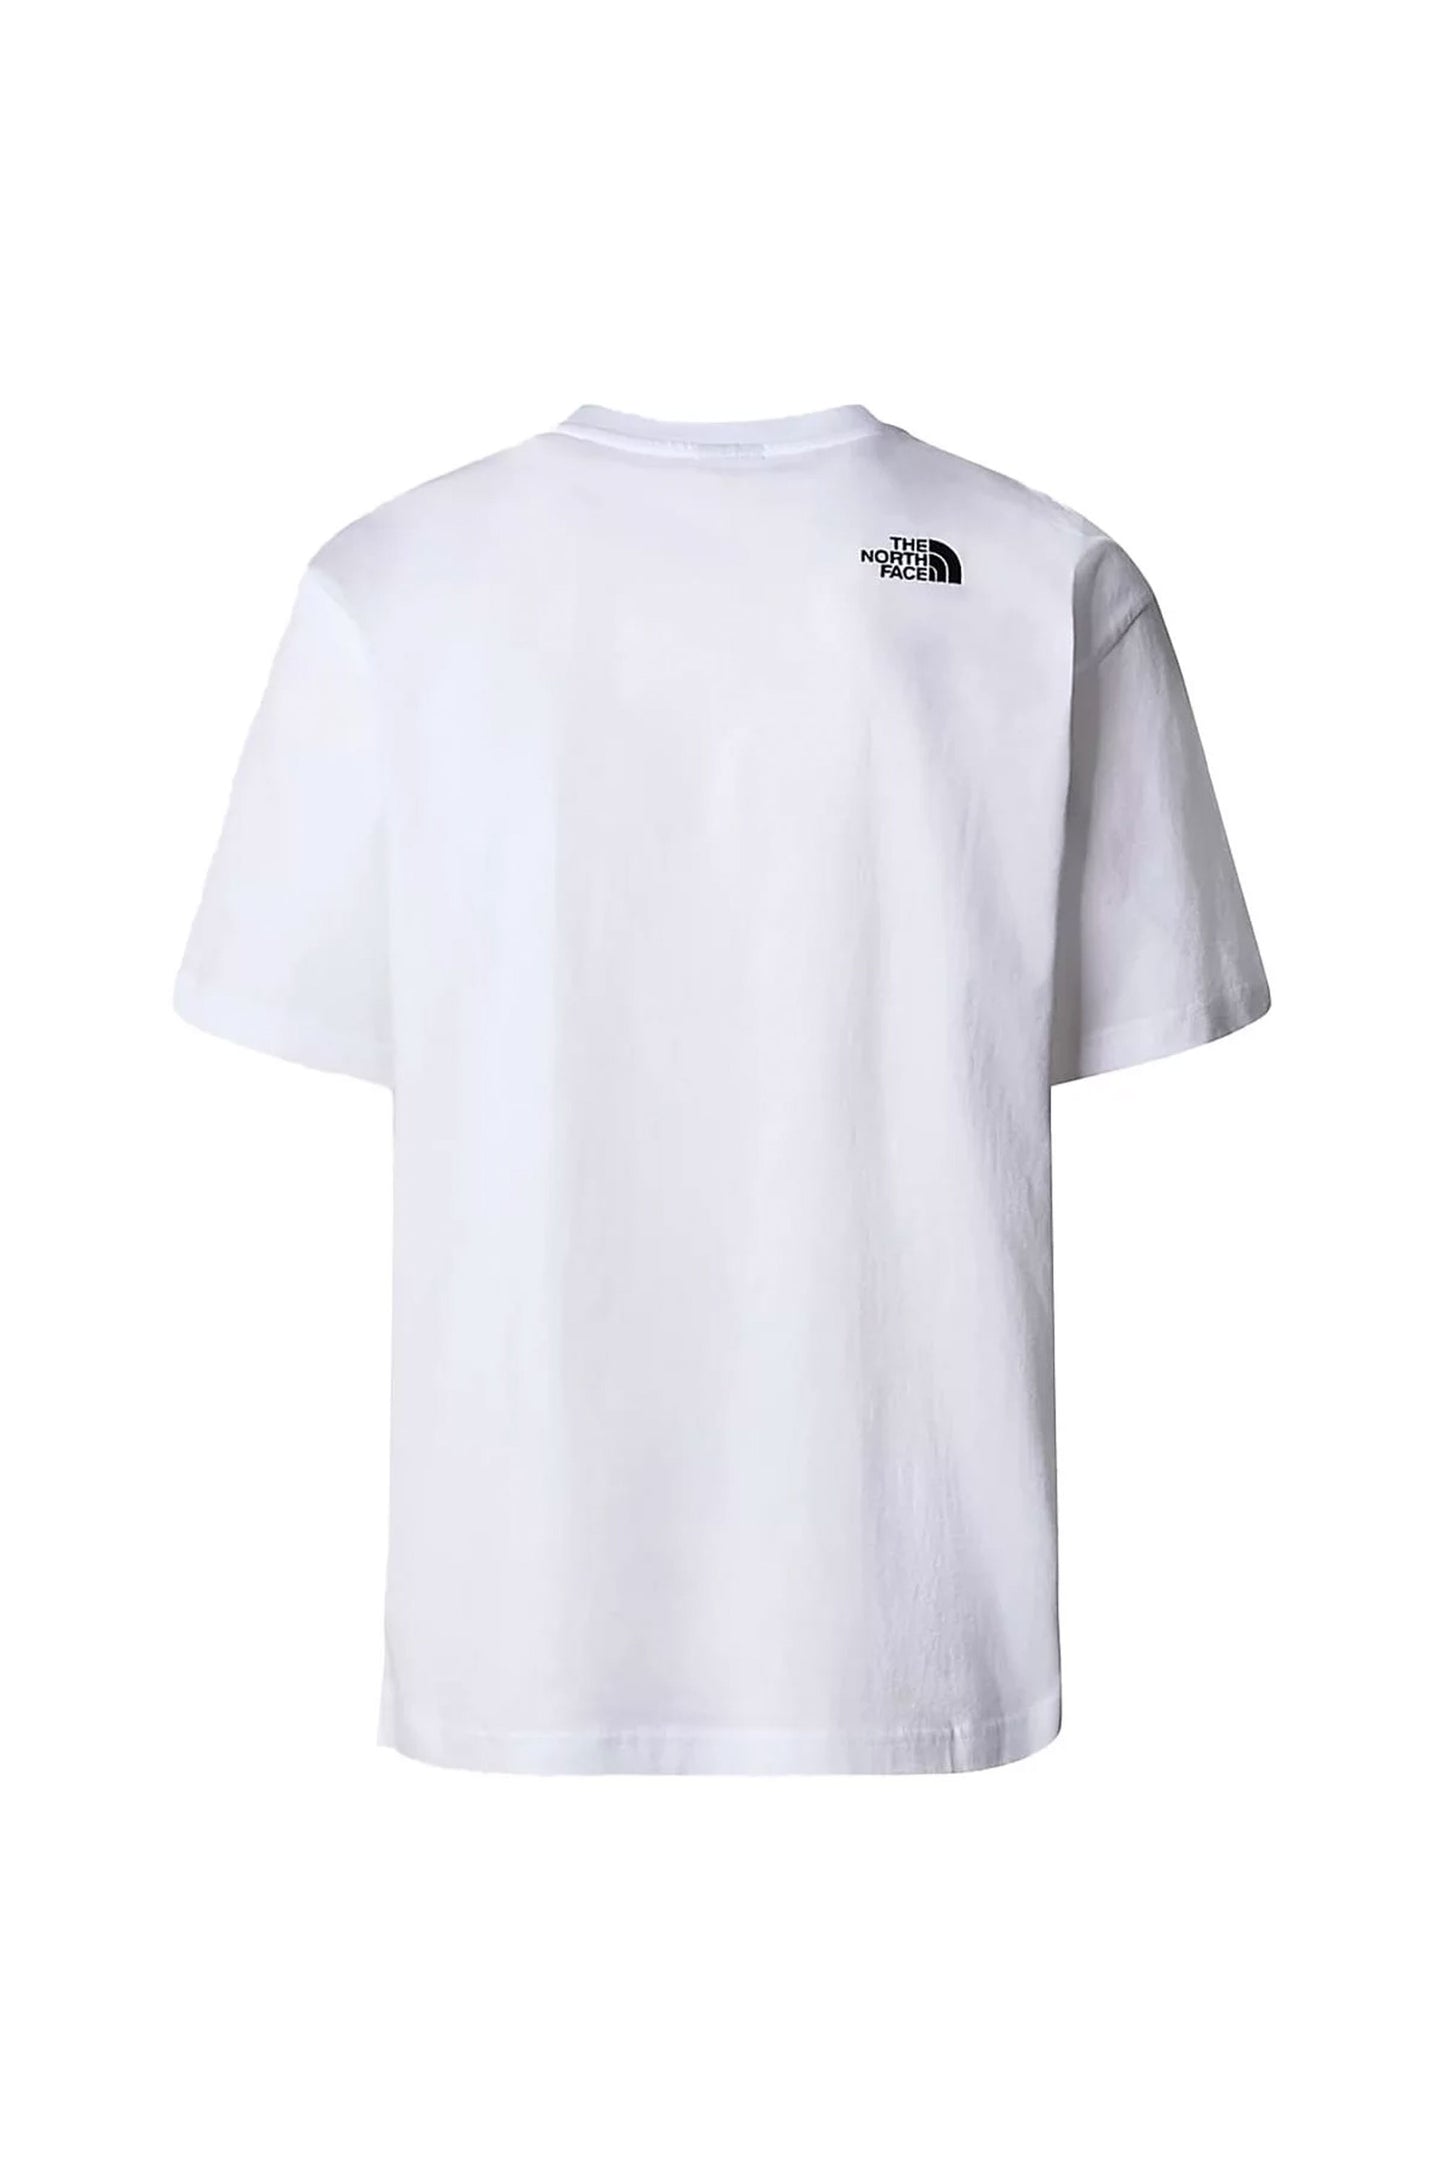 Pukas-Surf-Shop-the-north-face-man-tee-essential-oversize-white